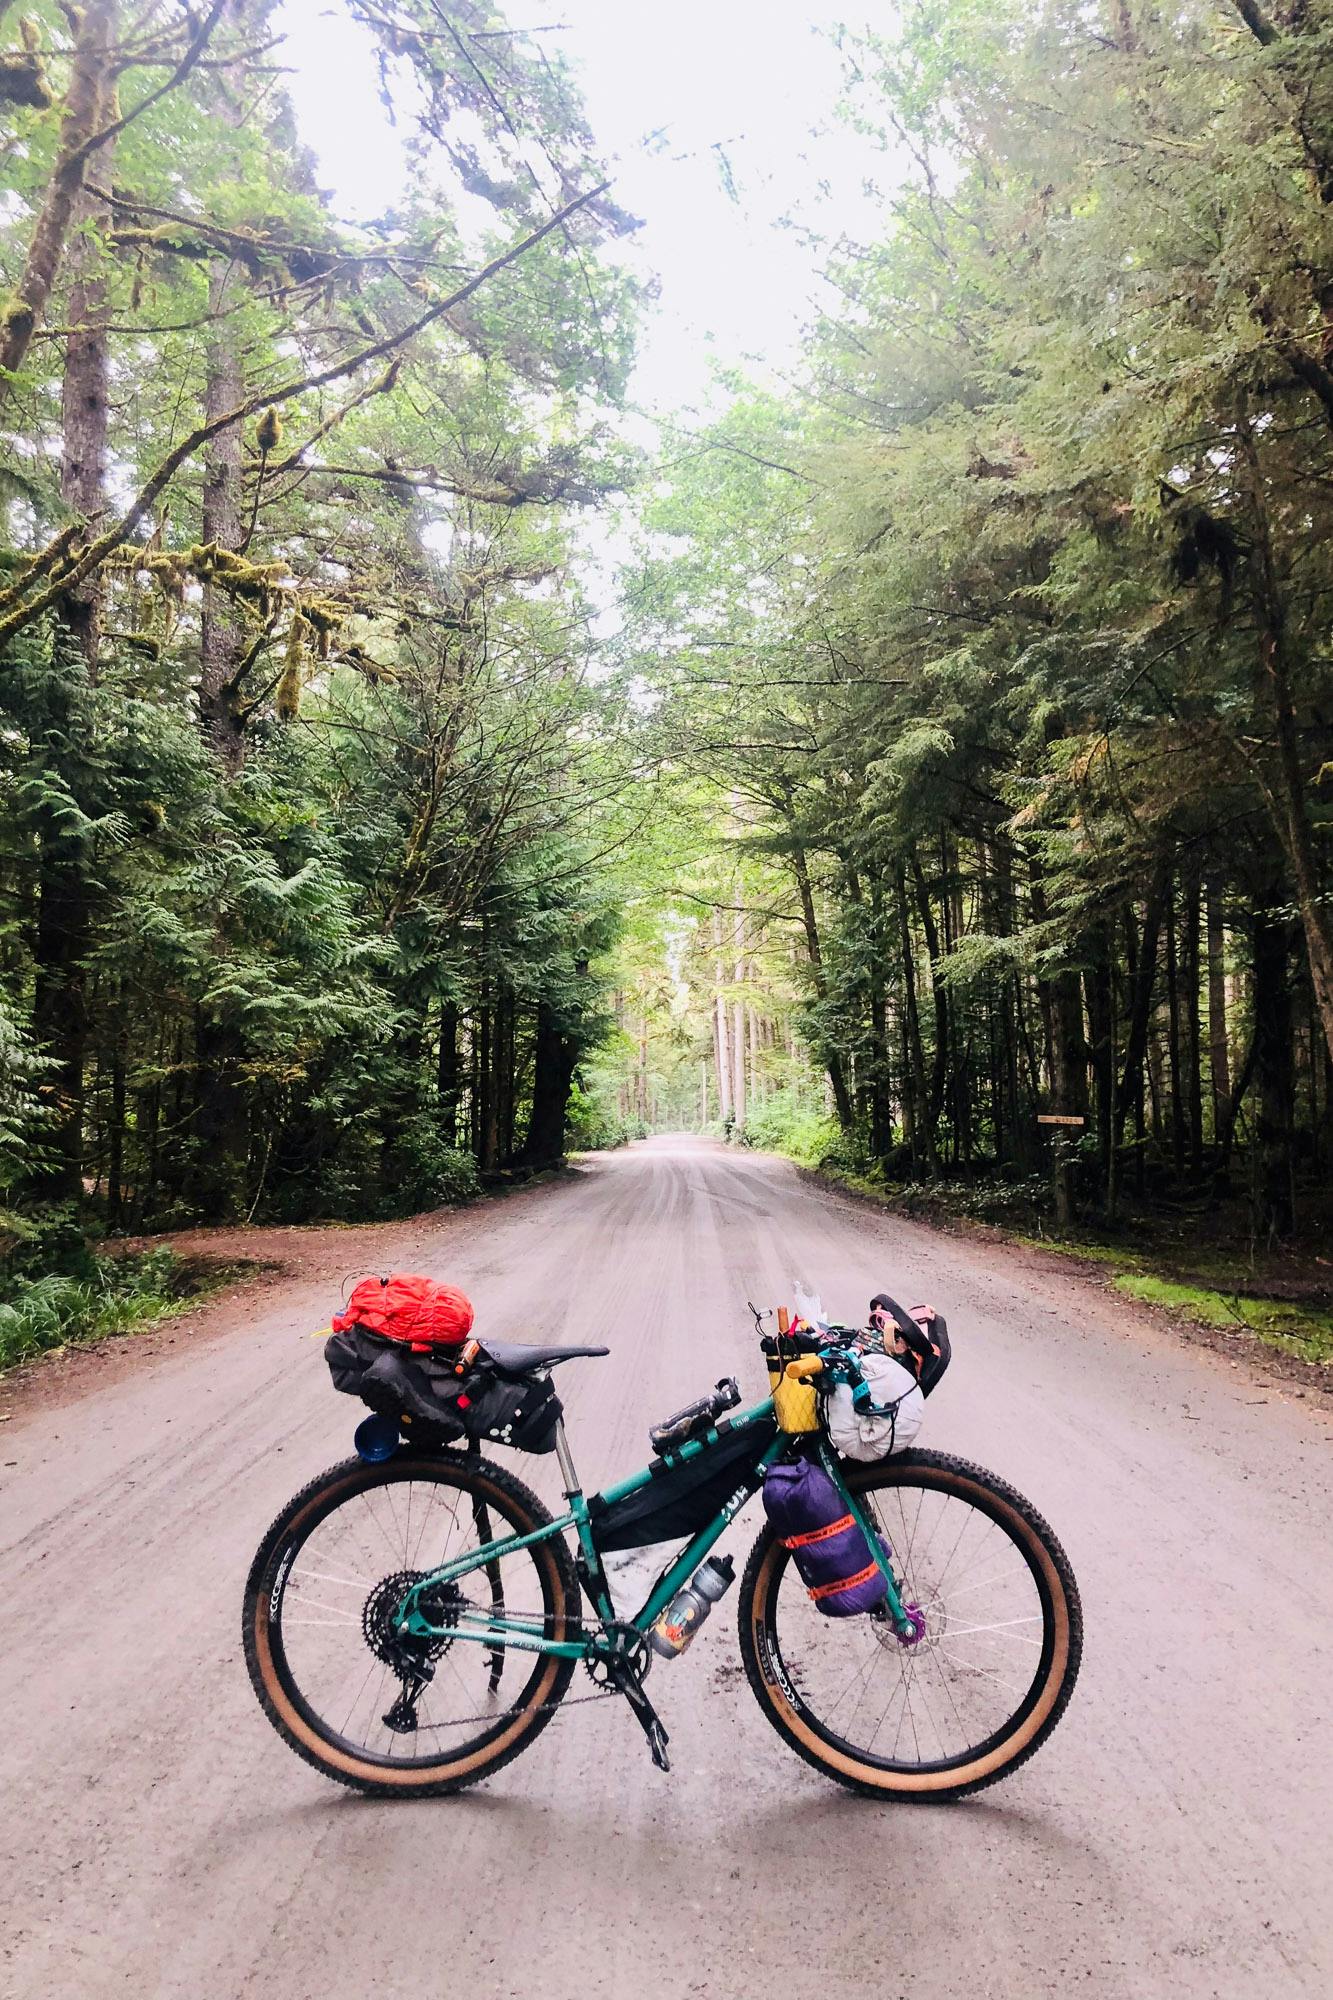 Sarahs Surly loaded for bikepacking.